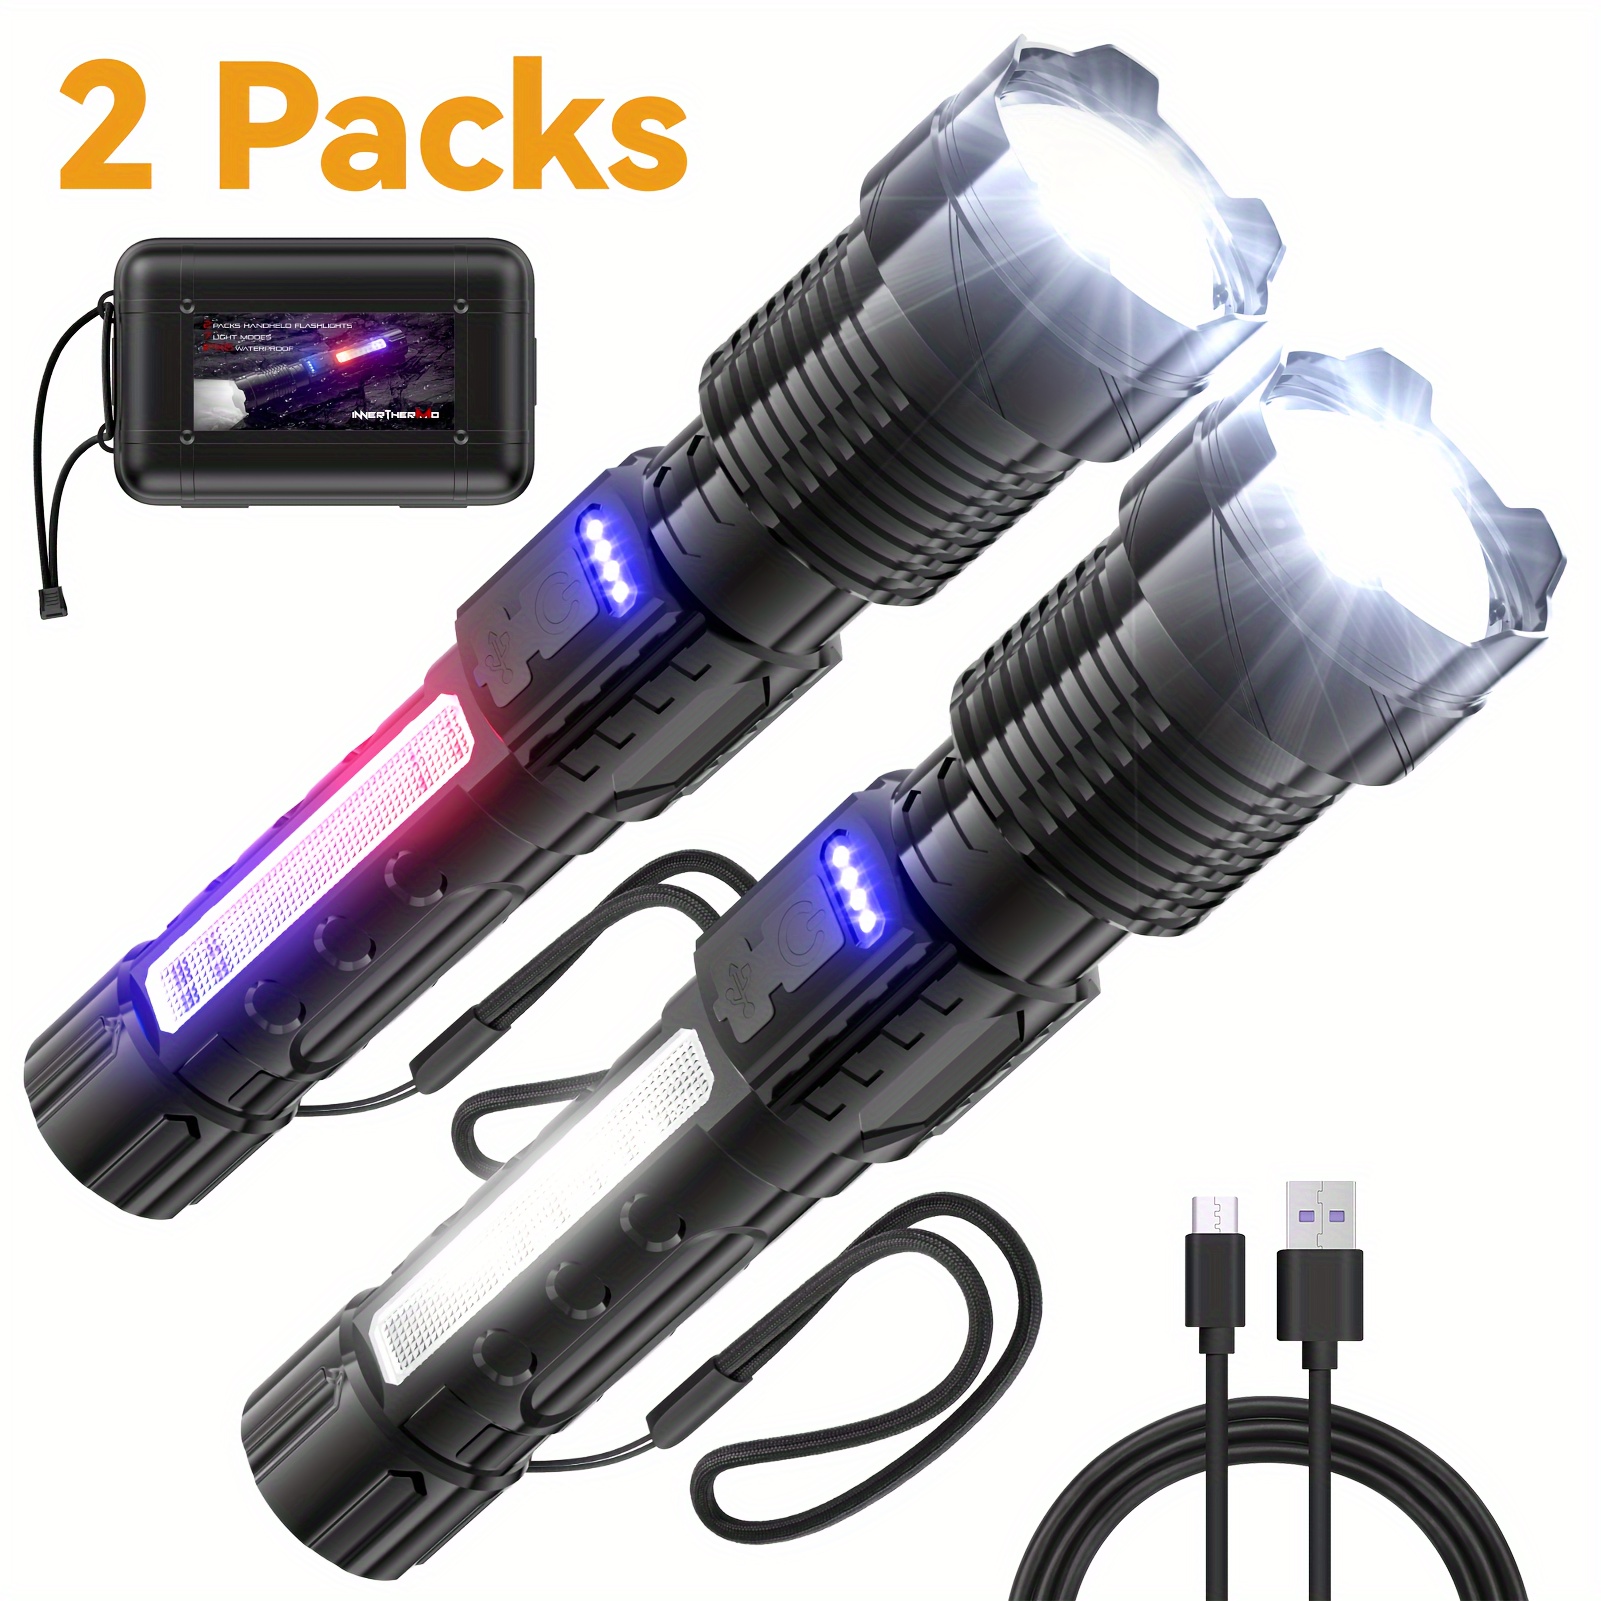 

Rechargeable Flashlights 2 Packs With 4000lm And 7 Light Modes, Multifunctional Tactical Led Flashlight With Cob Work Light, Power Display, Handheld Flash Light For Emergencies, Camping, Hiking